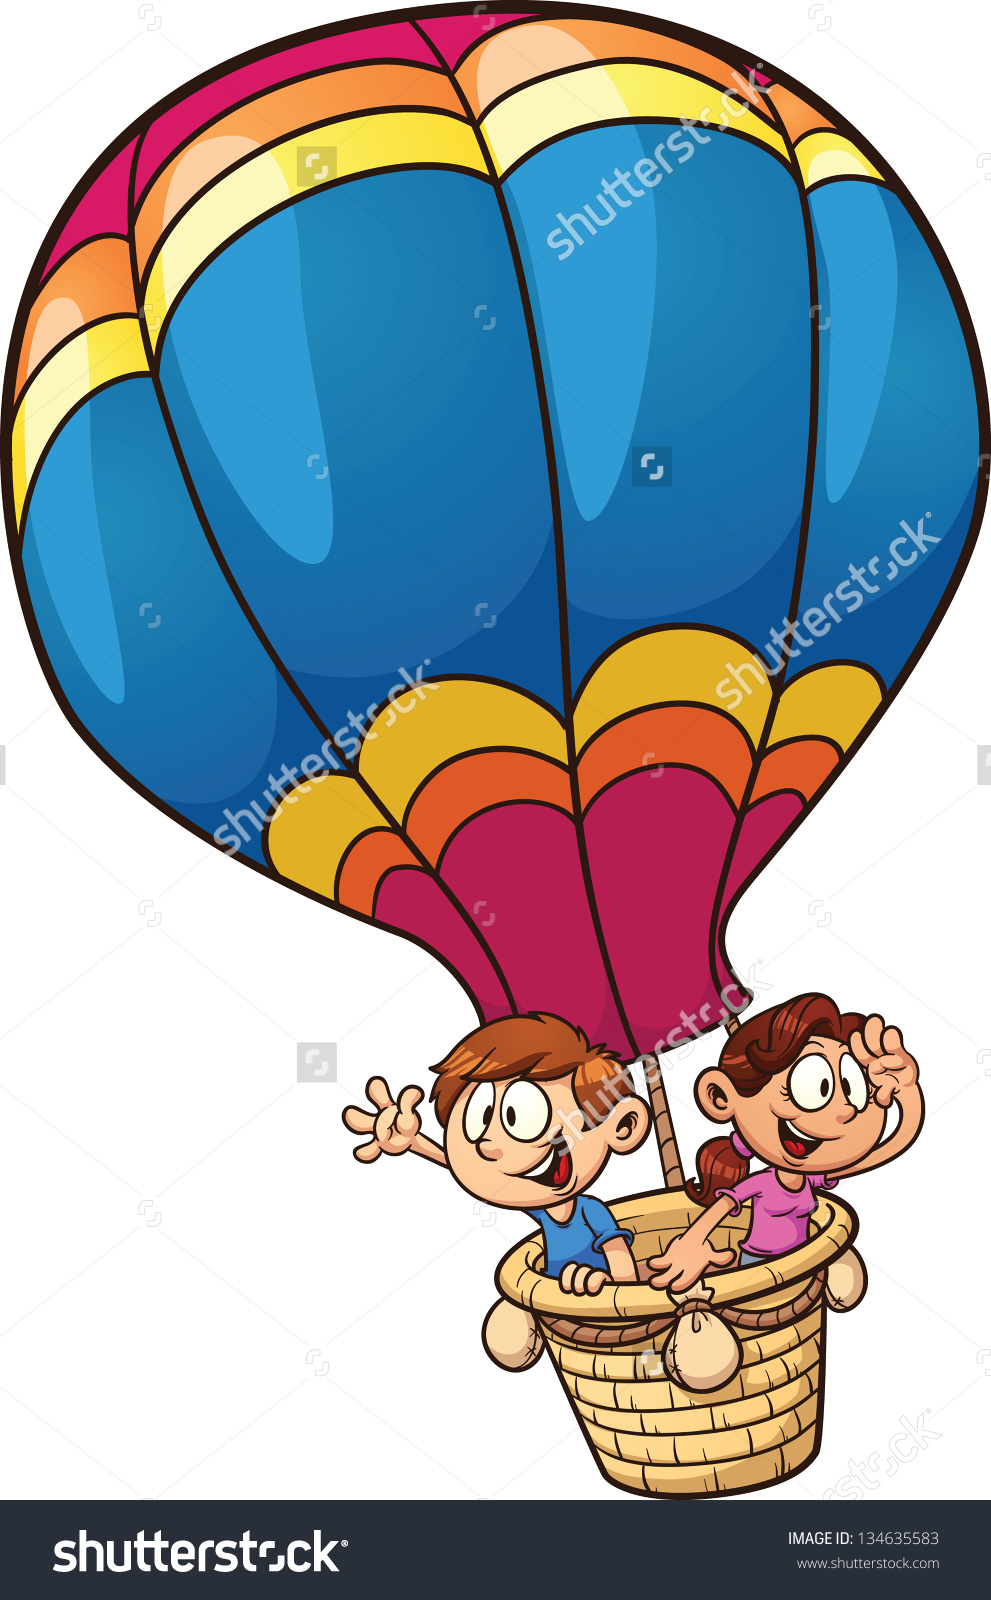 Cartoon kids riding a hot air balloon. Vector clip art illustration with simple gradients.